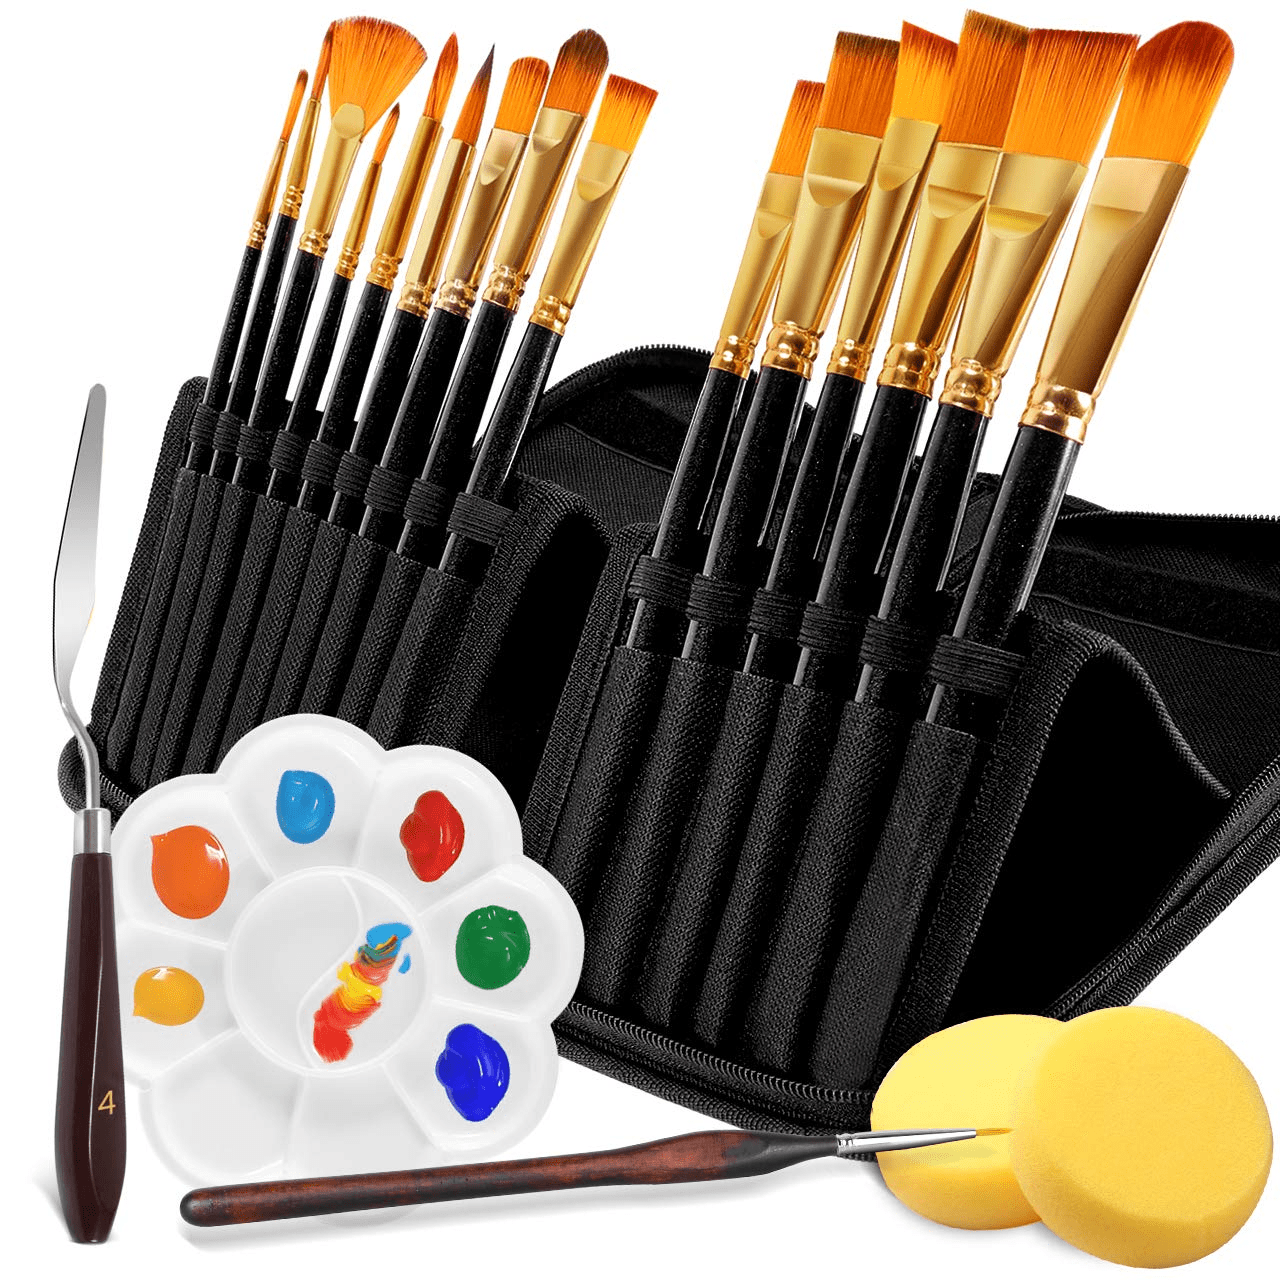 Watercolour Paint Brush Set Professionals and Beginners Watercolor Art and Craft Projects 10 Artist Quality Brushes for Water Colour Painting Portable Holder with Pop-up Paintbrush Stand 